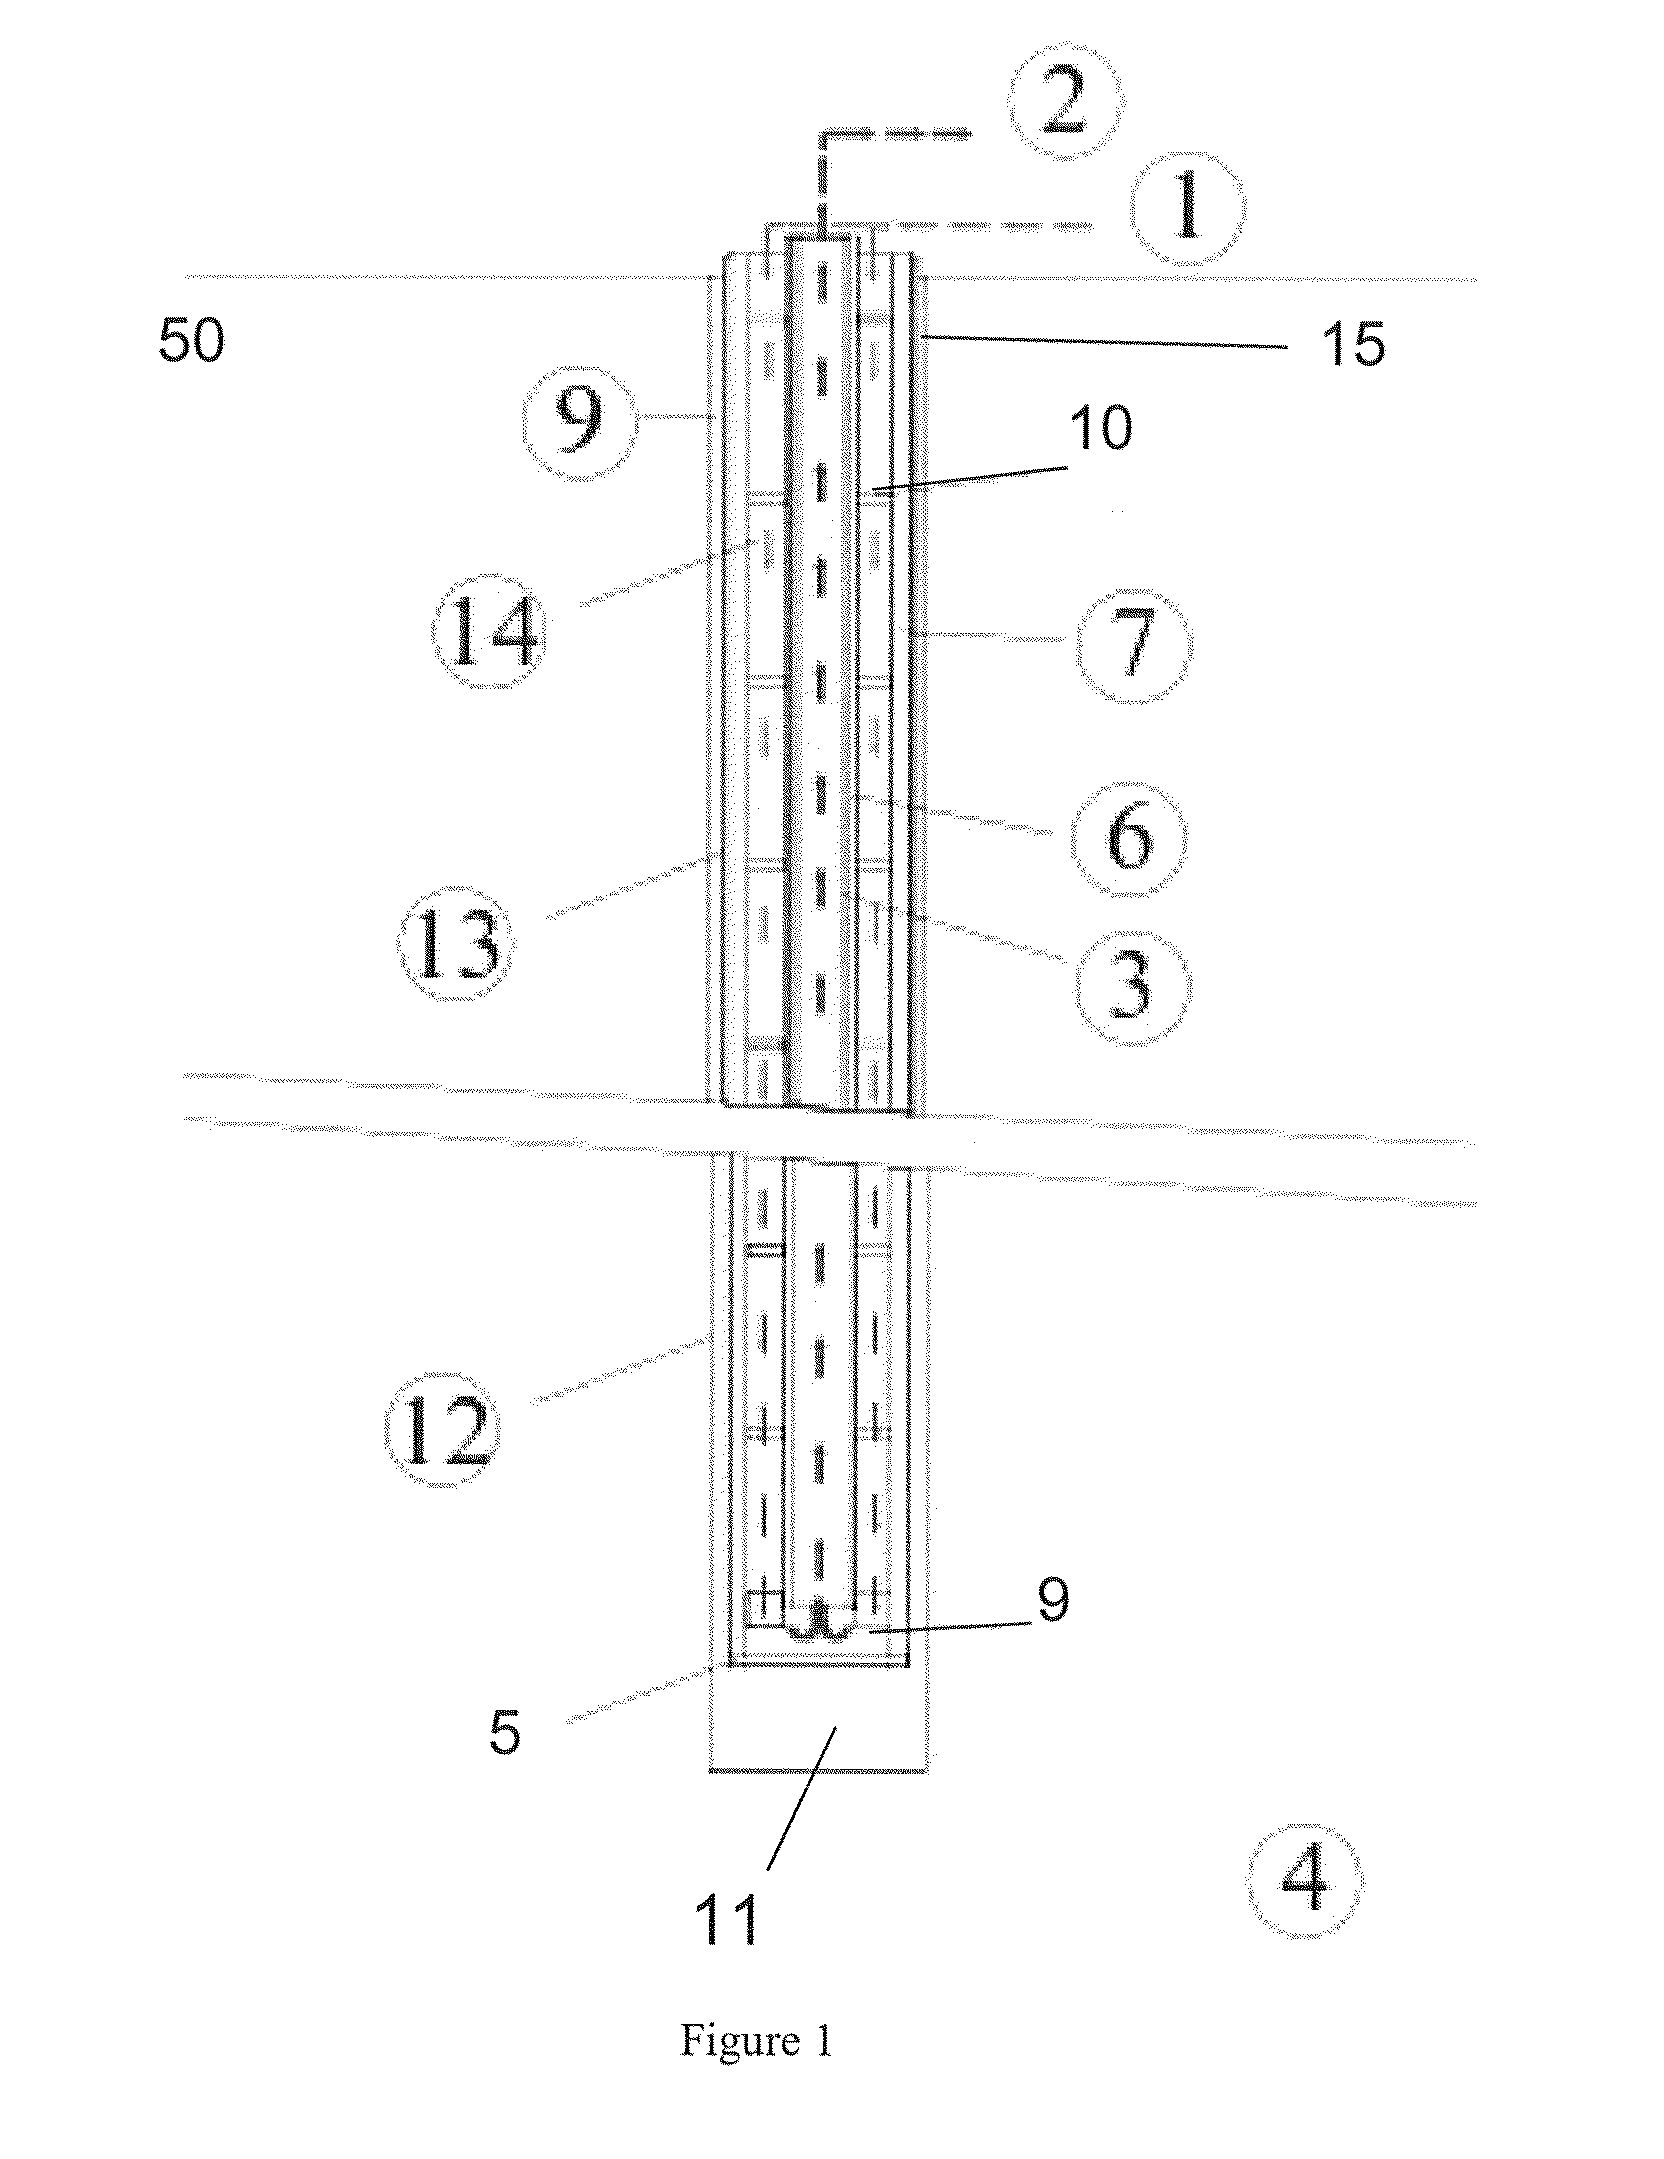 Geothermal loop in-ground heat exchanger for energy extraction